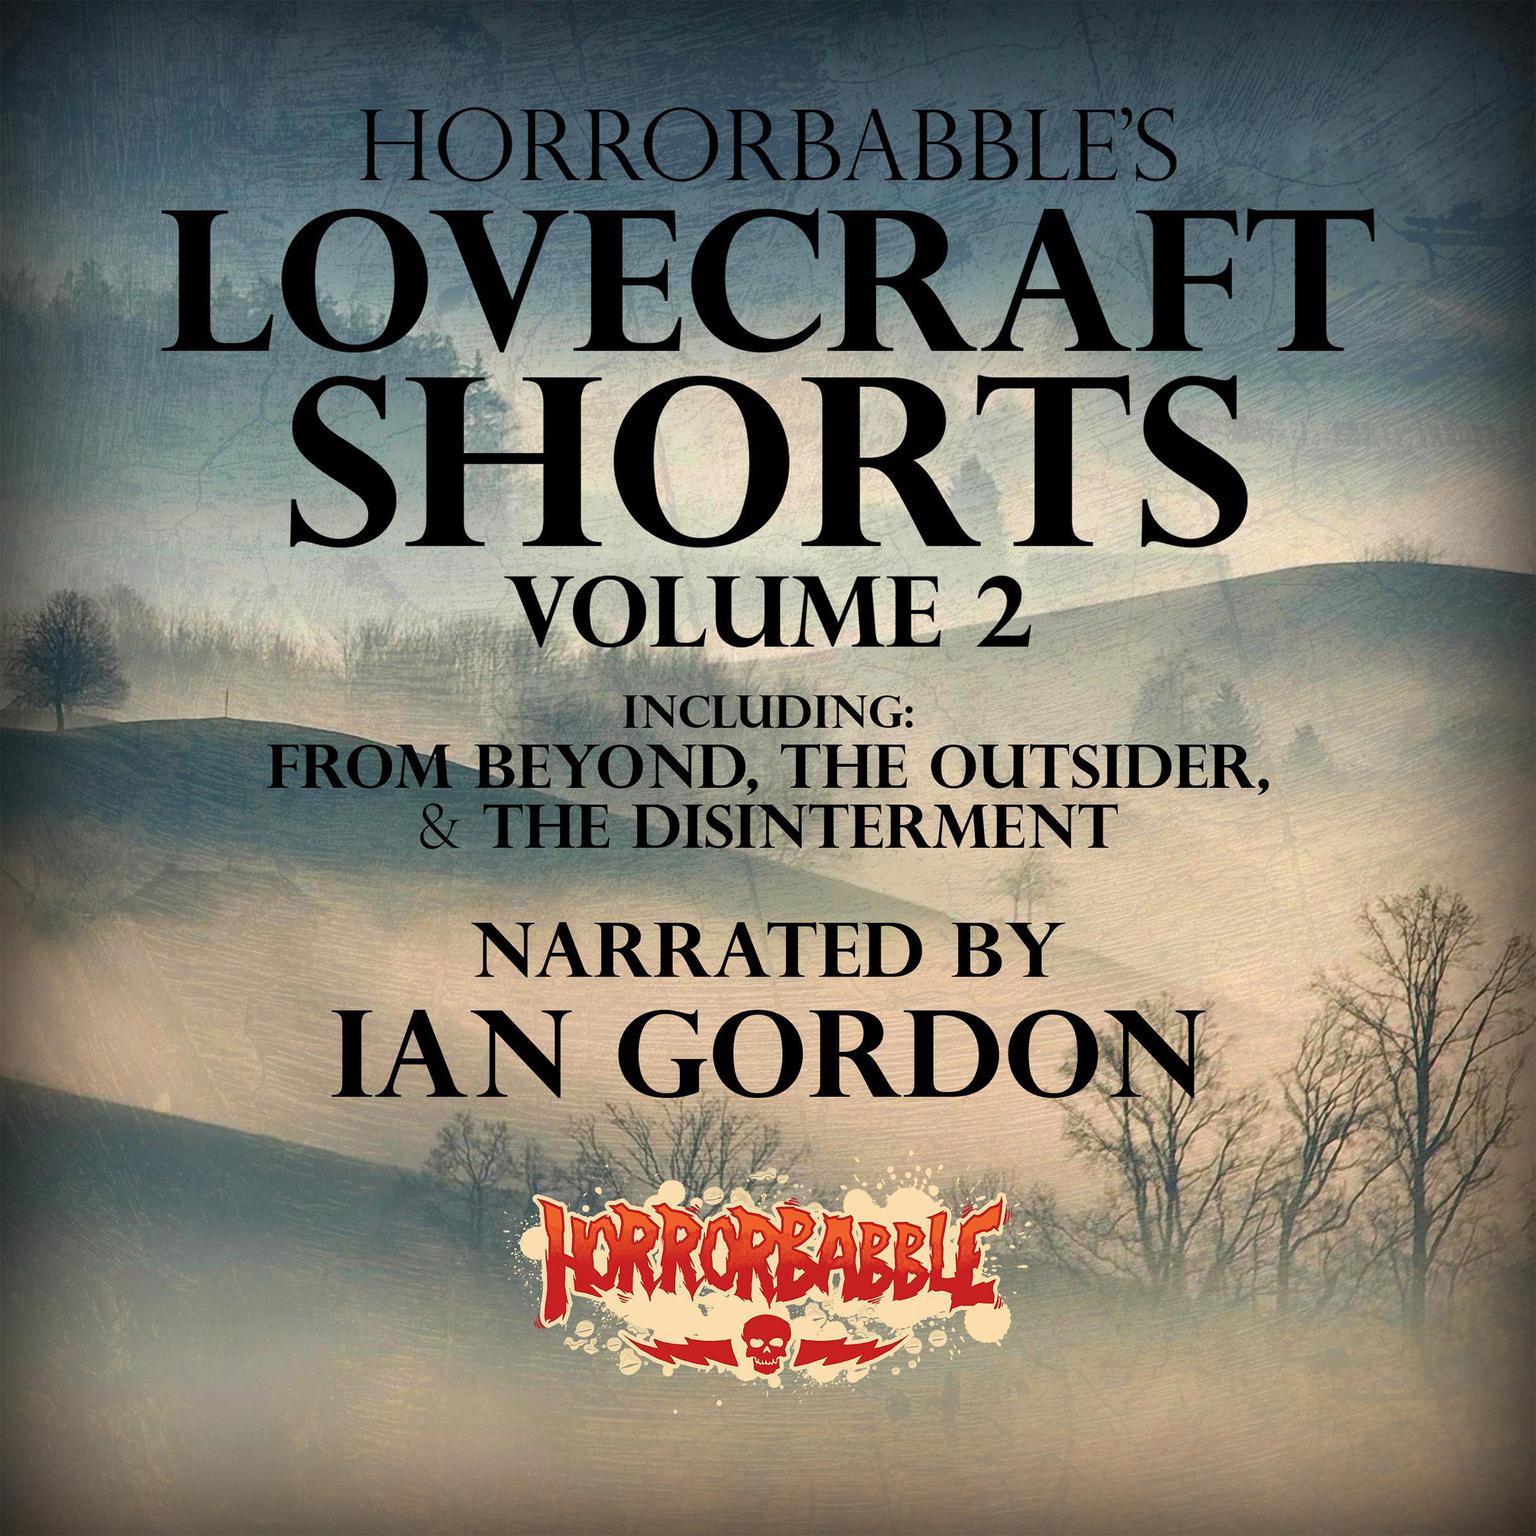 Horrorbabbless Lovecraft Shorts: Volume 2 Audiobook, by H. P. Lovecraft